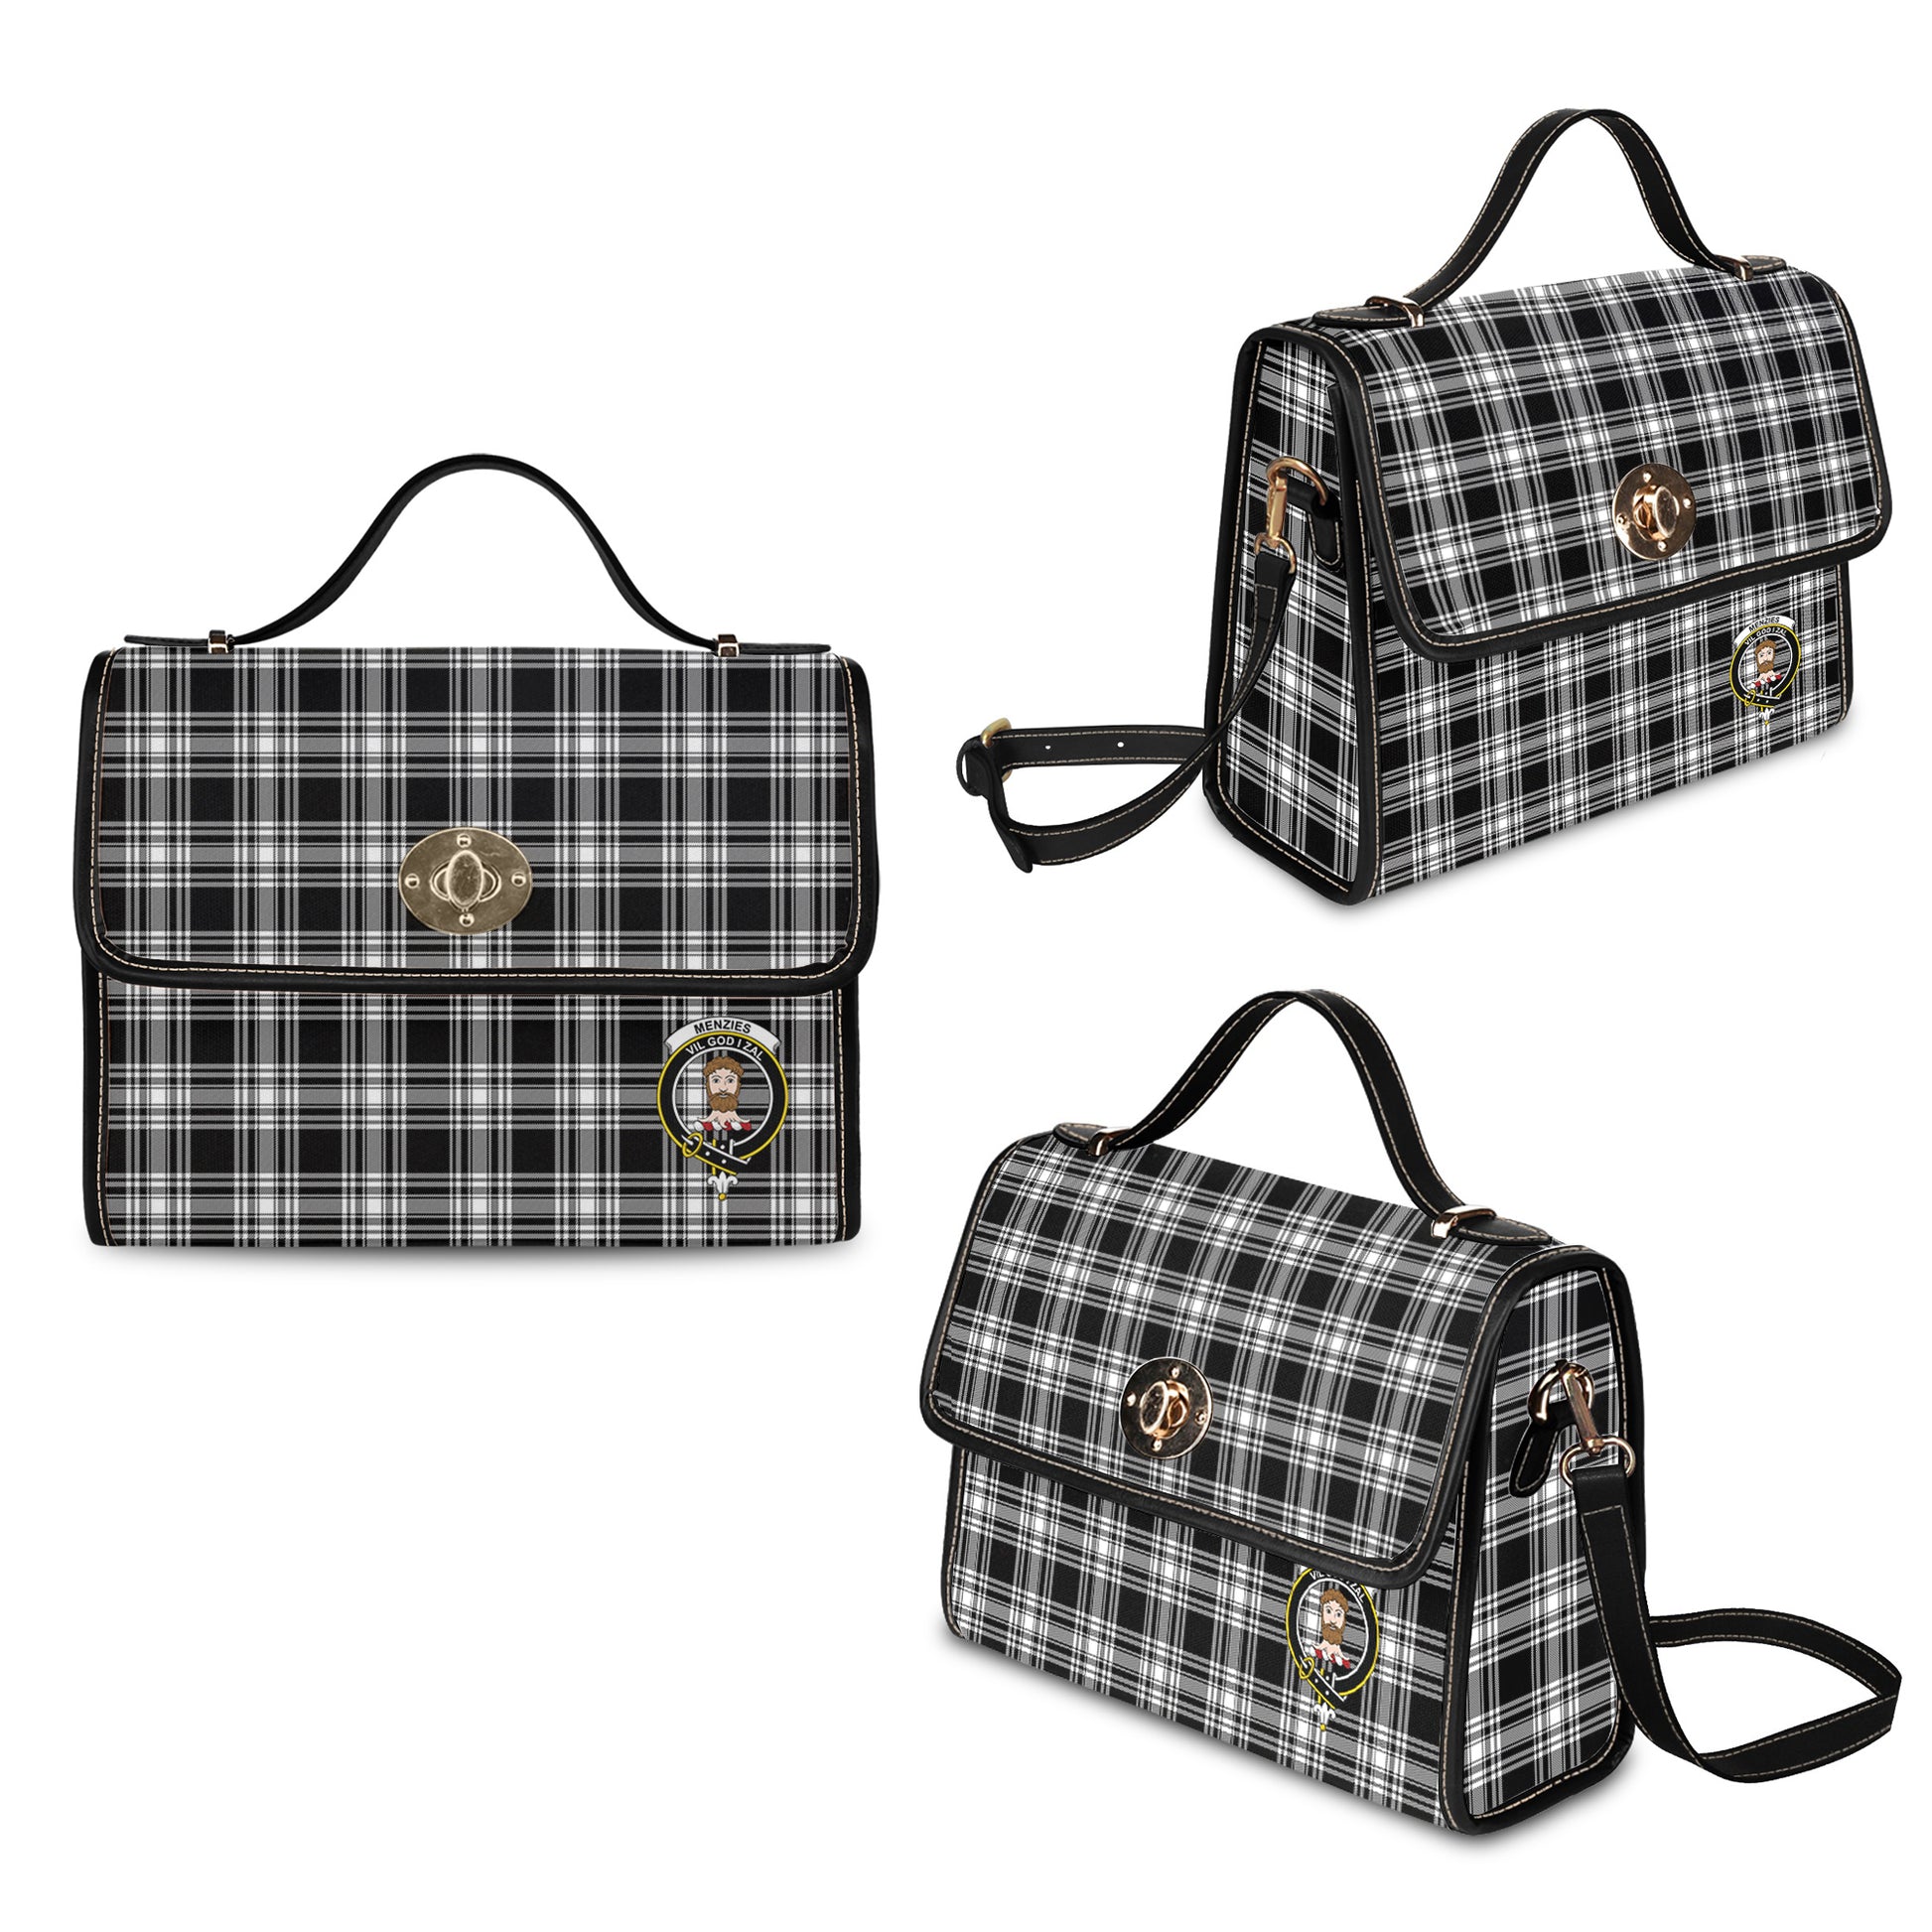 menzies-black-and-white-tartan-leather-strap-waterproof-canvas-bag-with-family-crest